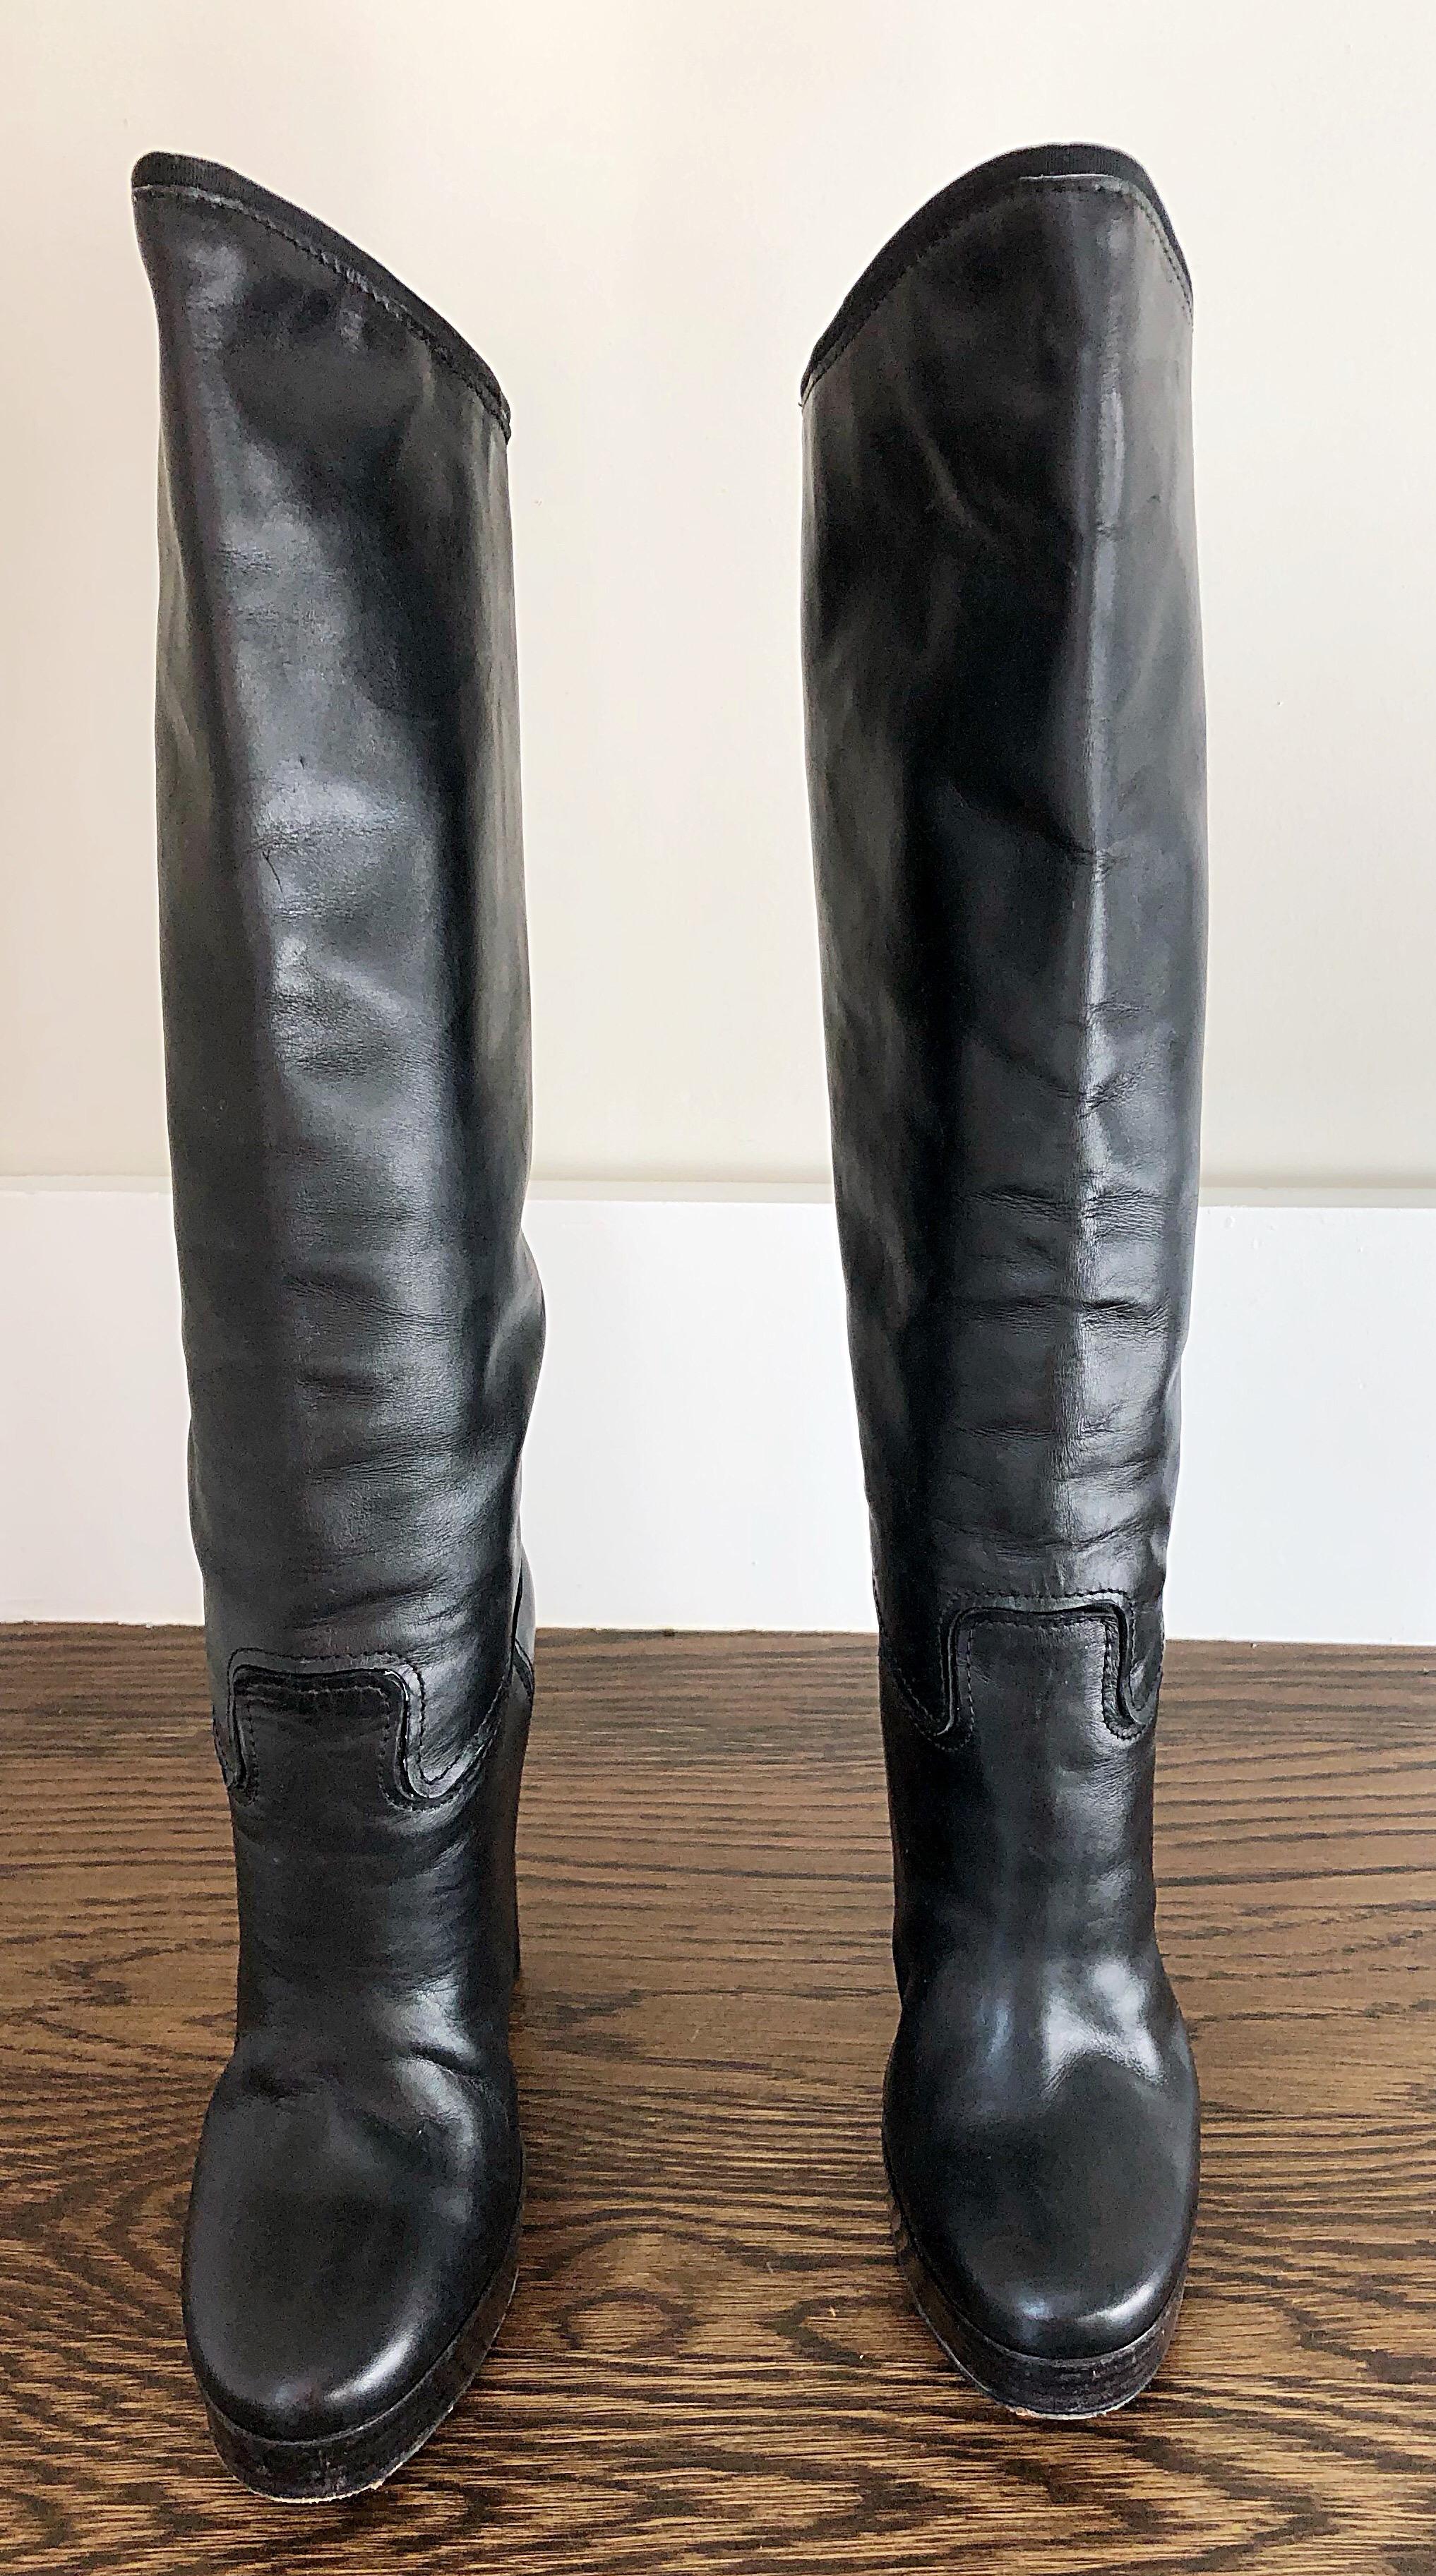 Stylish LANVIN Size 35 / US 5 black leather stacked high heel knee high boots! Perfect everyday boots that can easily be dressed up or down. Comfortable stacked heel. Great with jeans, a dress, or a skirt. In good condition.
Made in Italy
Marked